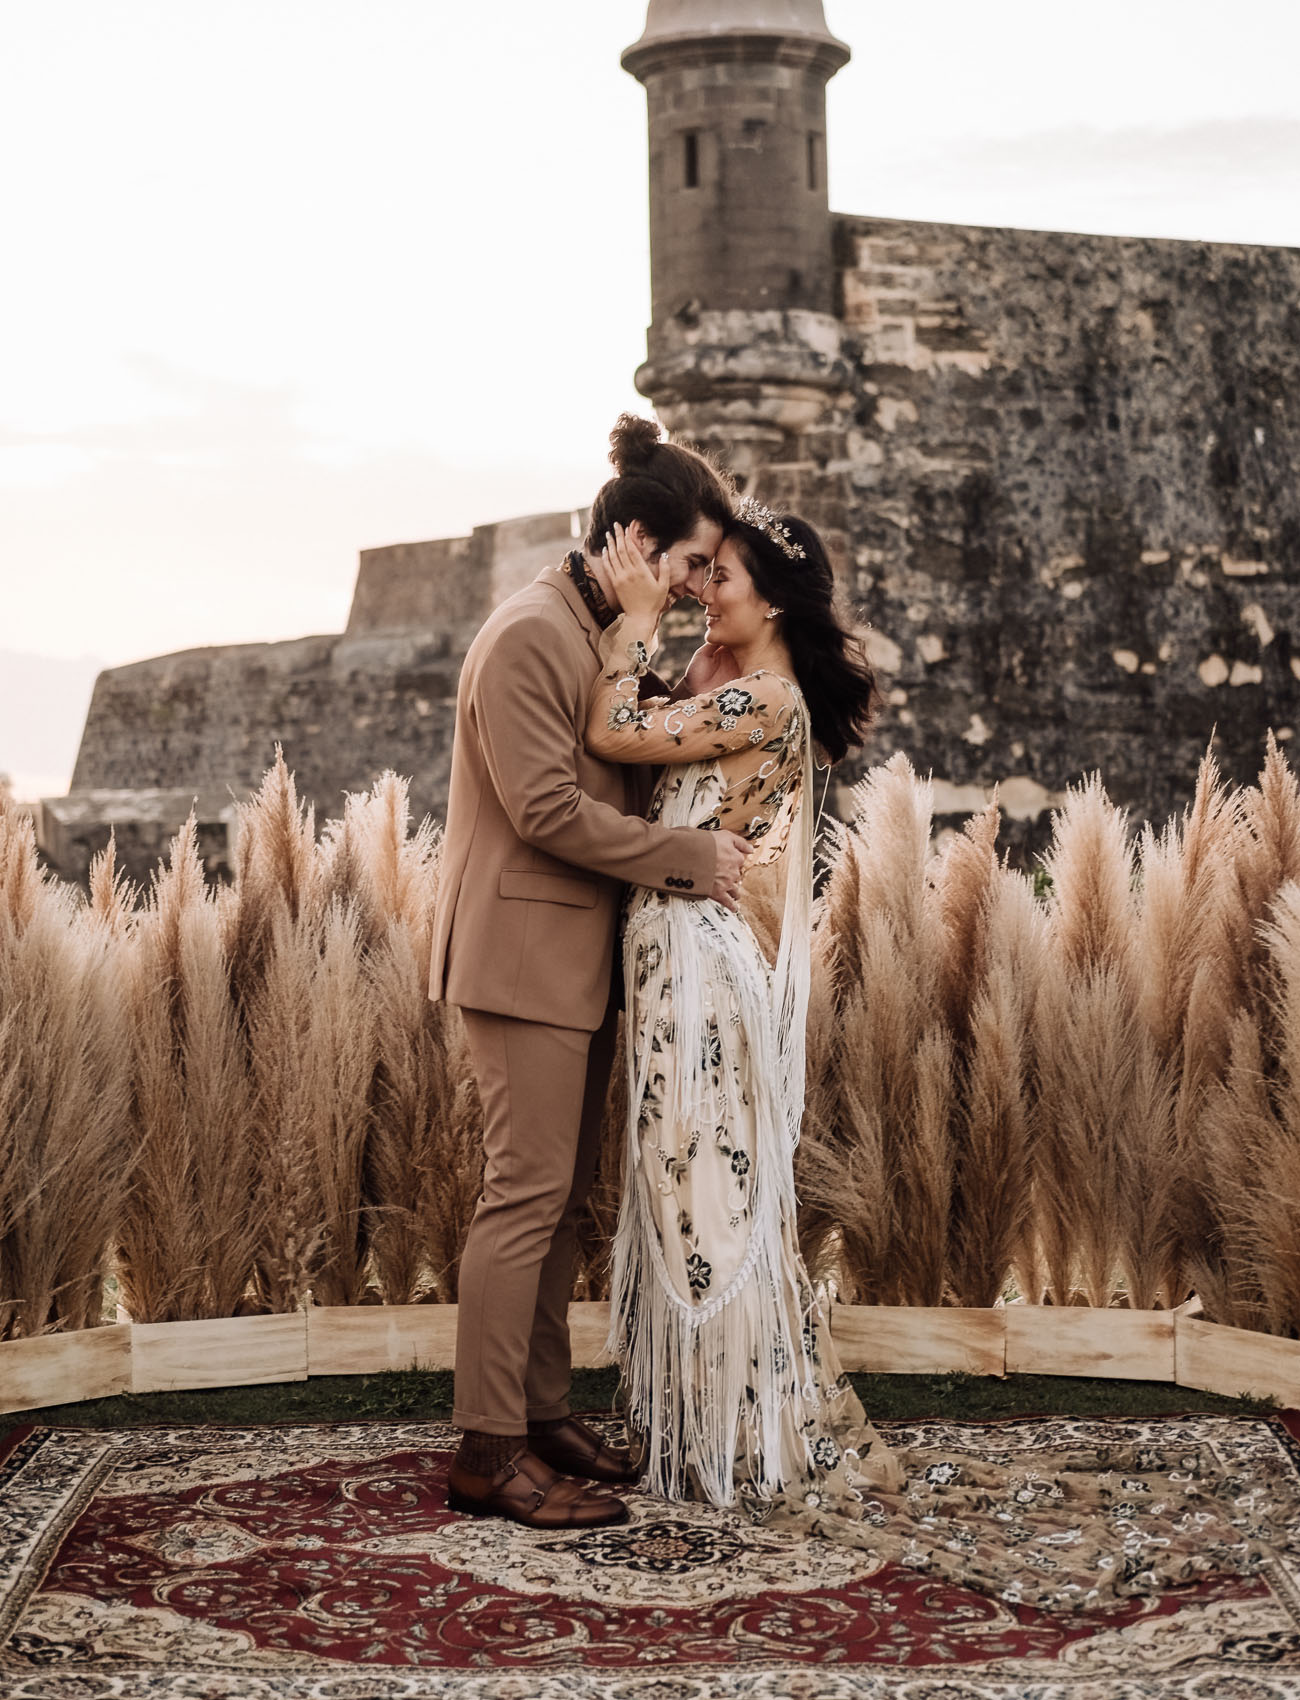 This destination wedding shoot took place in Puerto Rico, in a castle and was filled with all things boho